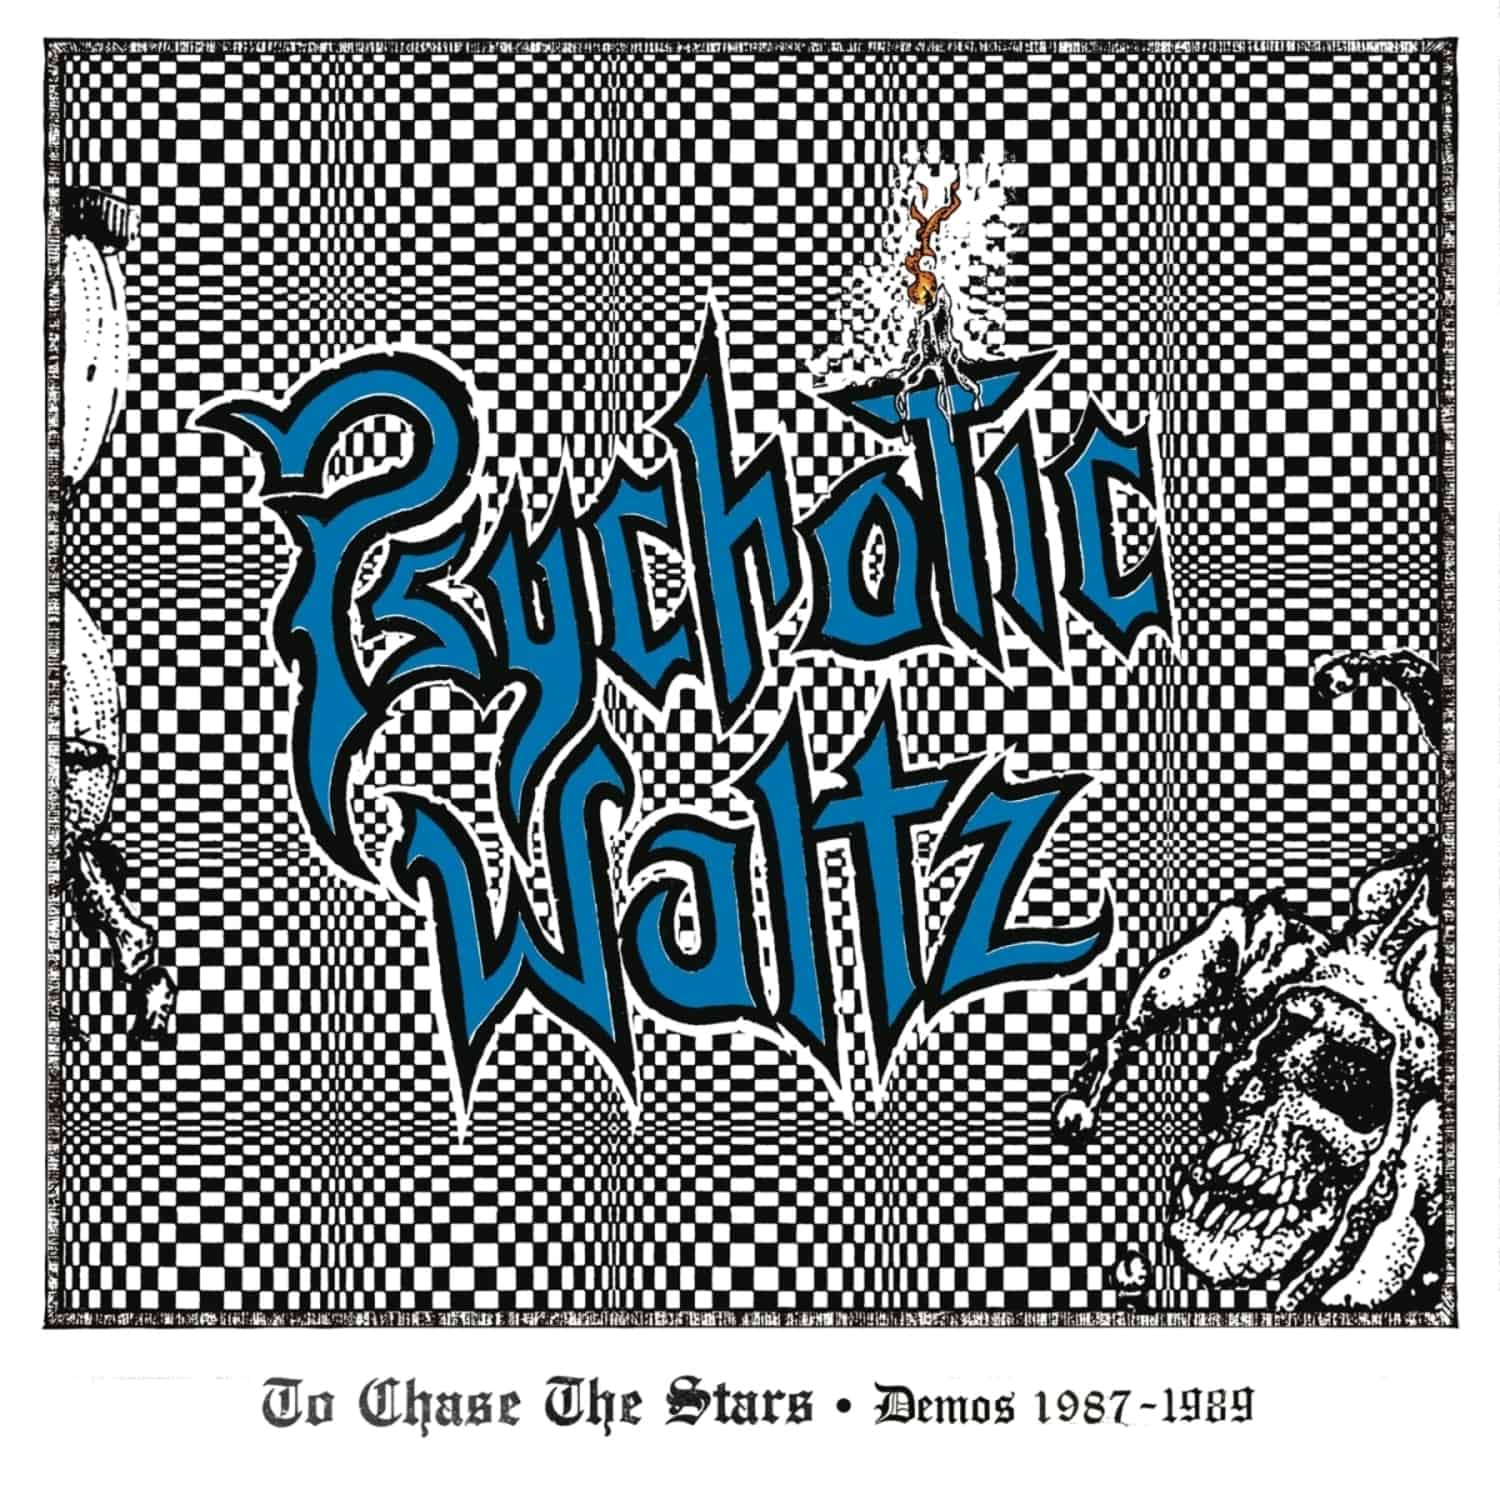 Psychotic Waltz - TO CHASE THE STARS 